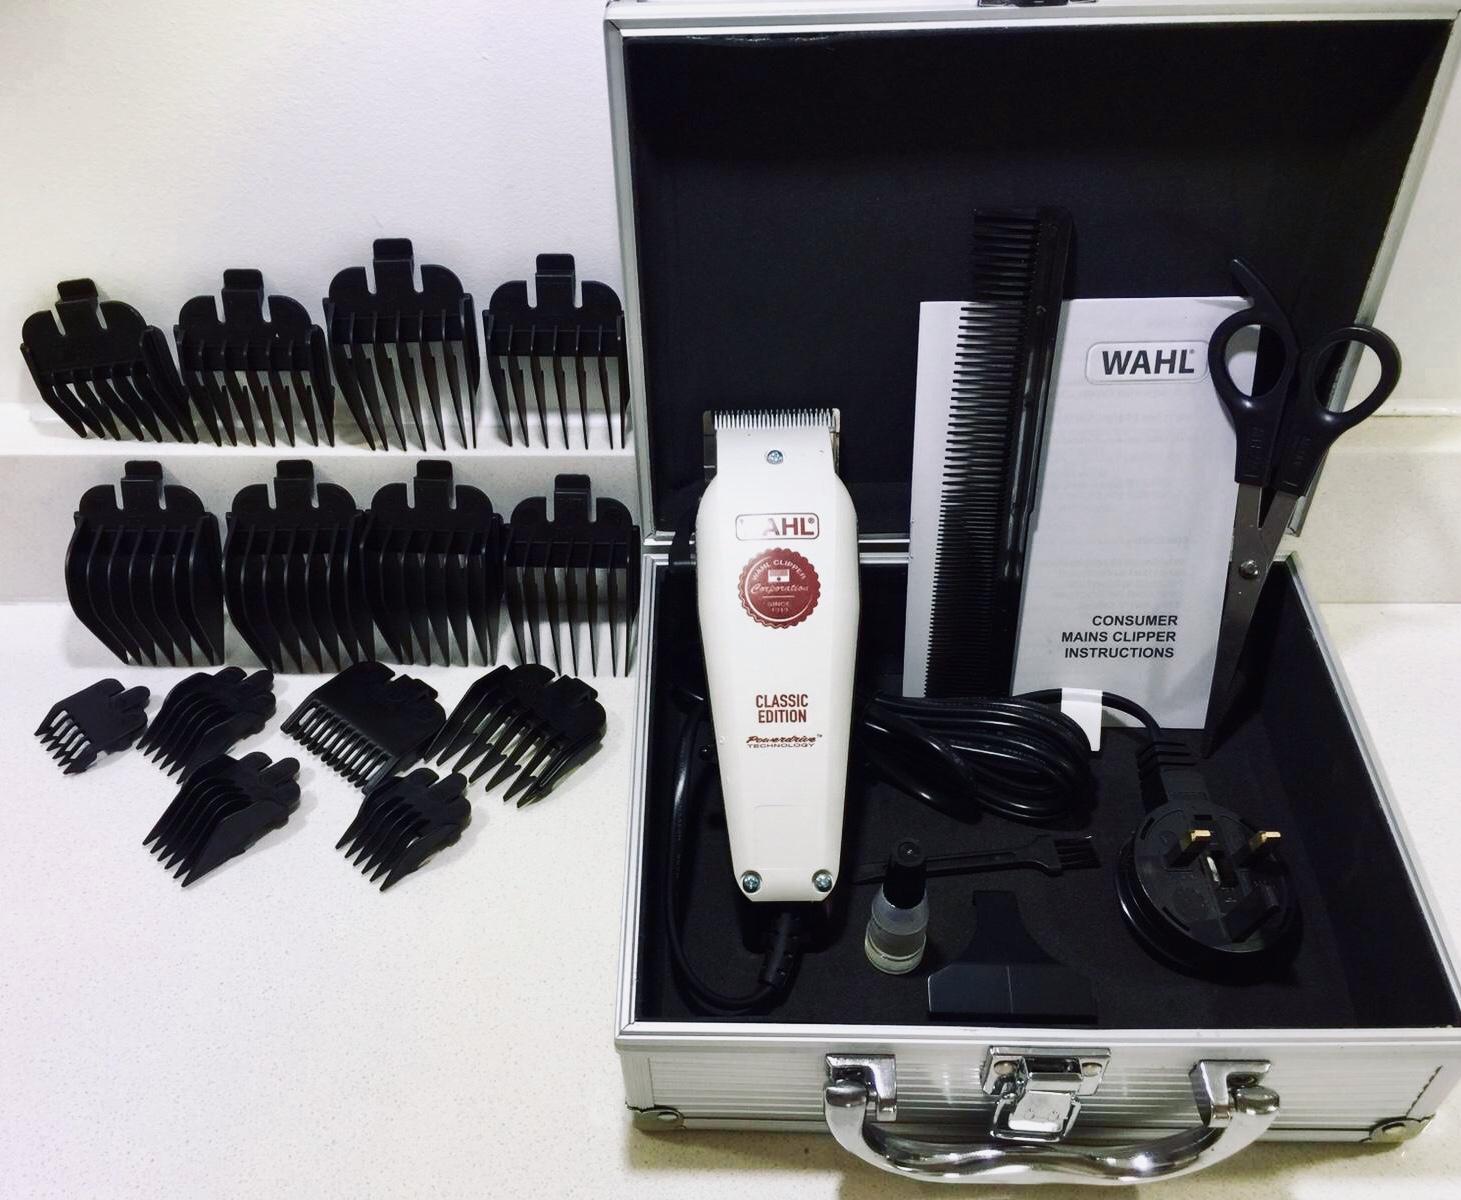 wahl classic edition clipper gift set review